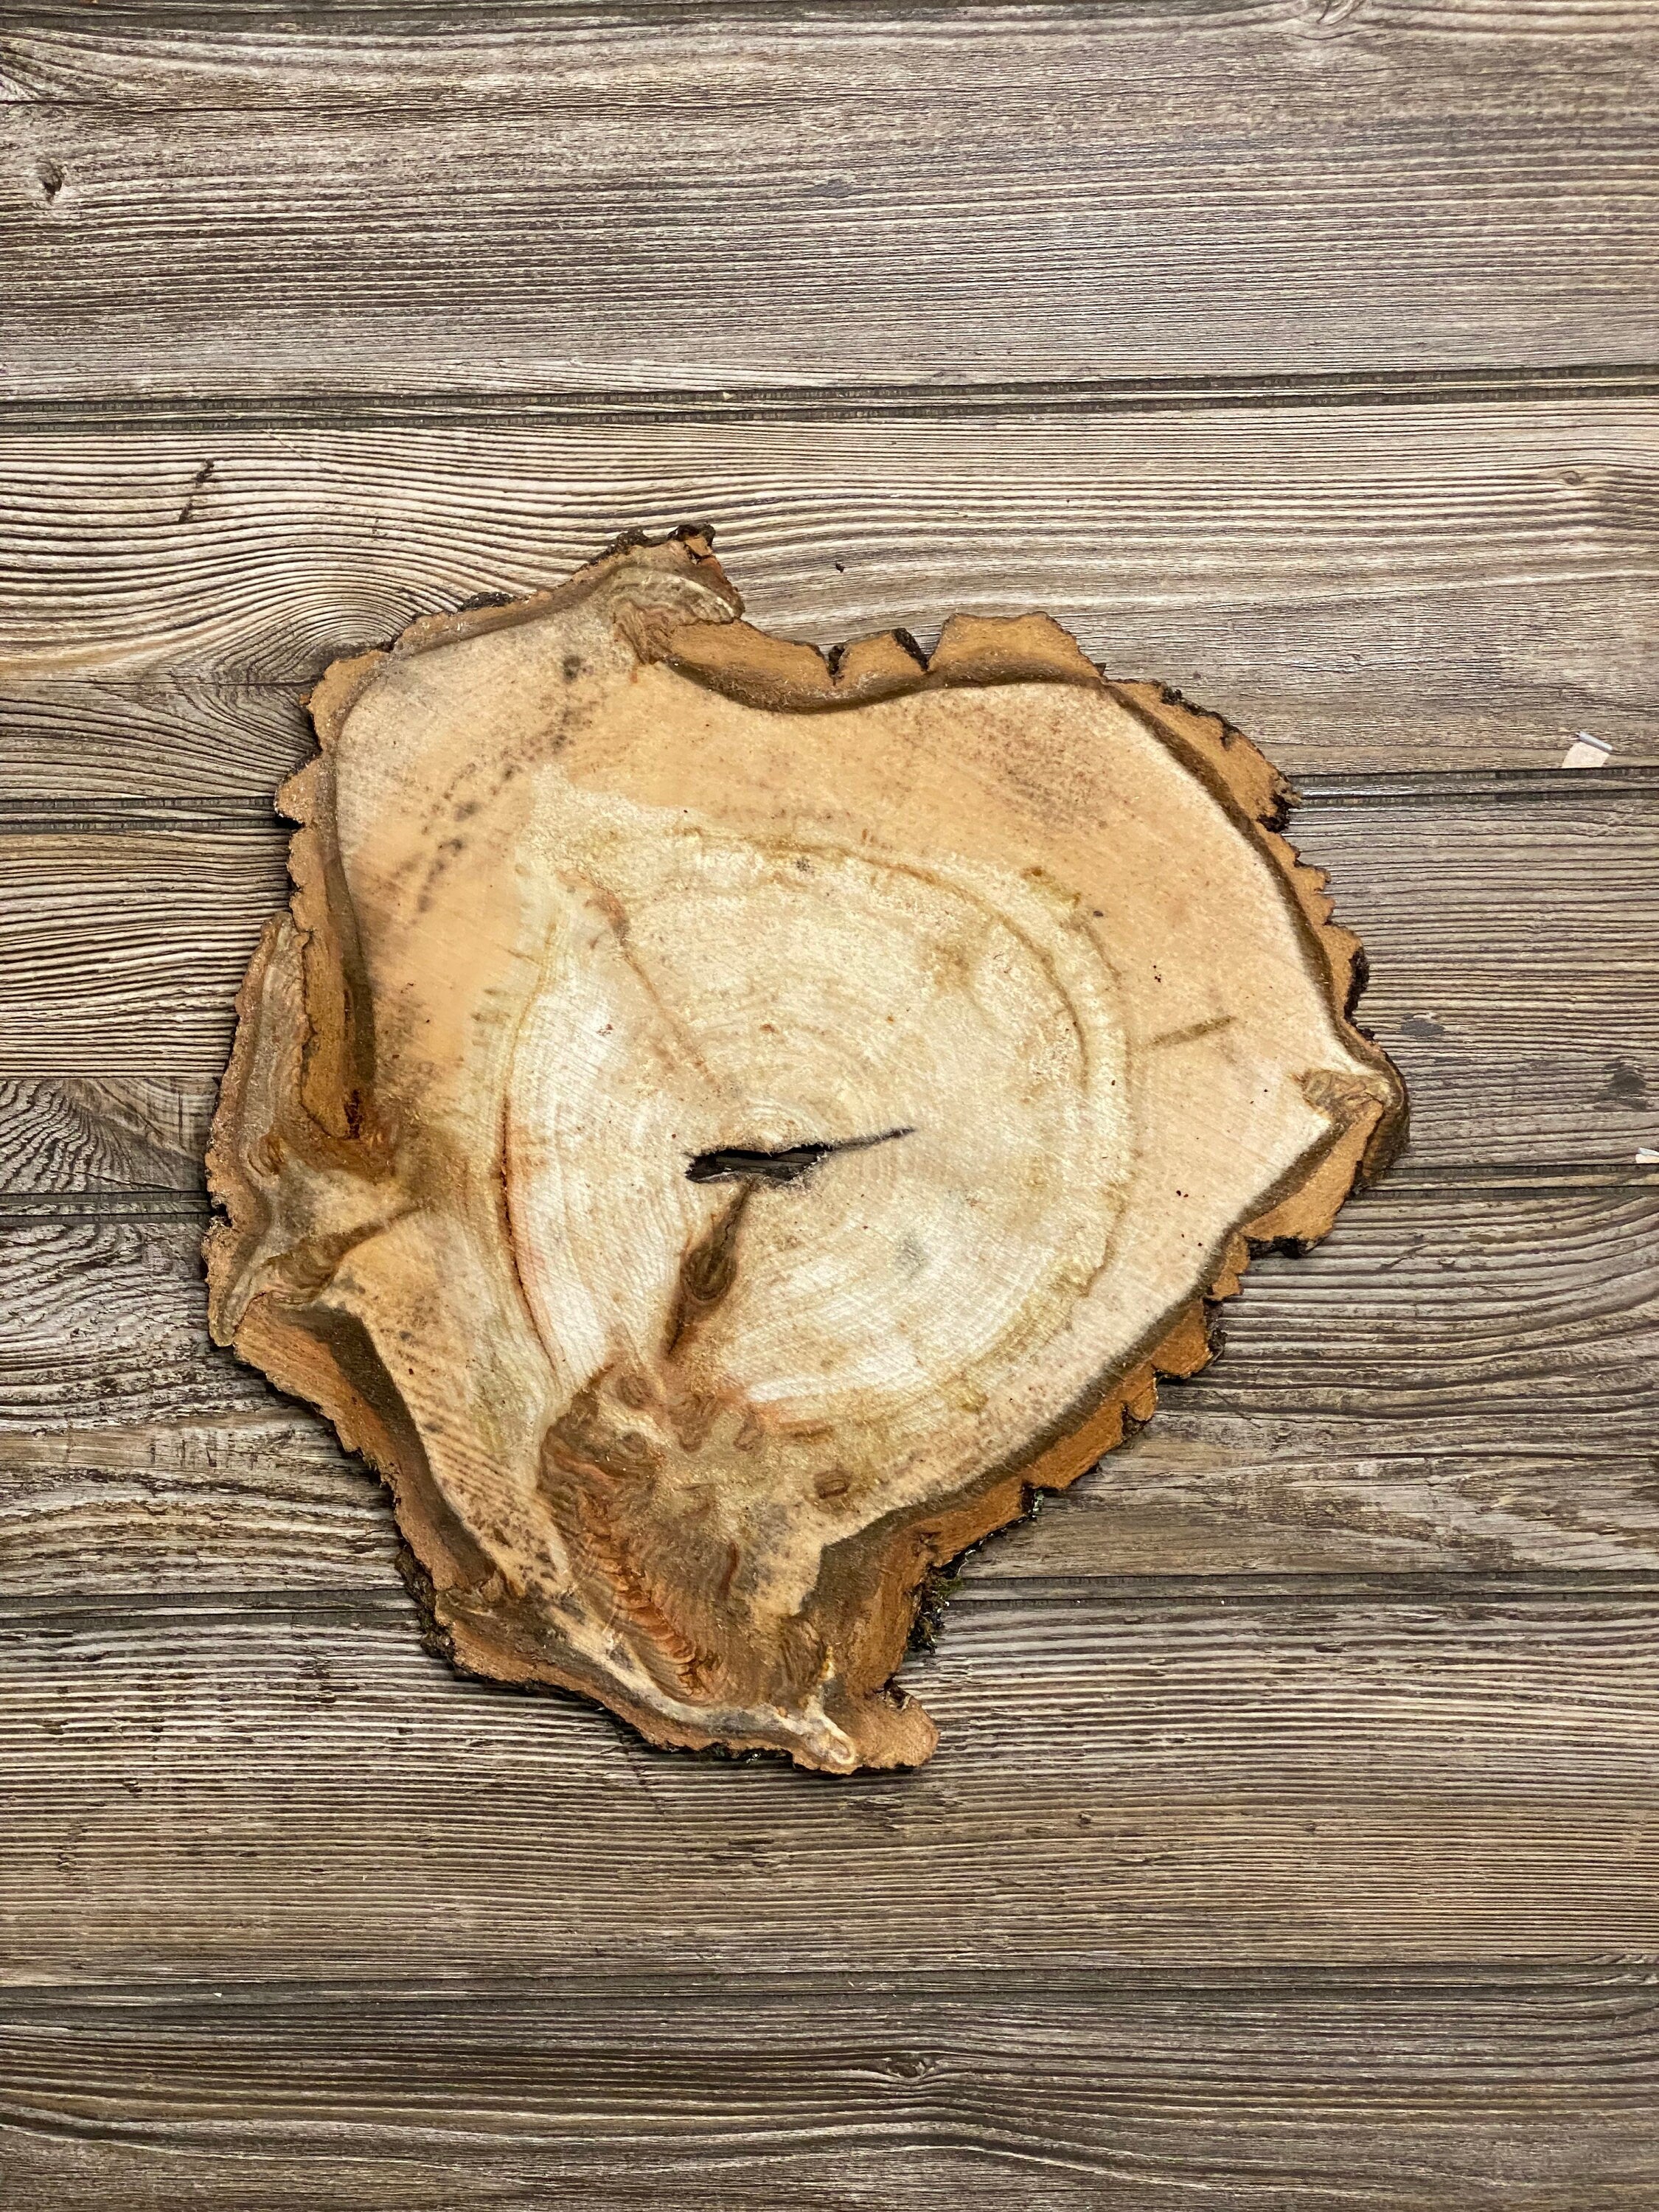 Aspen Burl Slice, Approximately 12 Inches Long by 12 Inches Wide and 3/4 Inch Thick